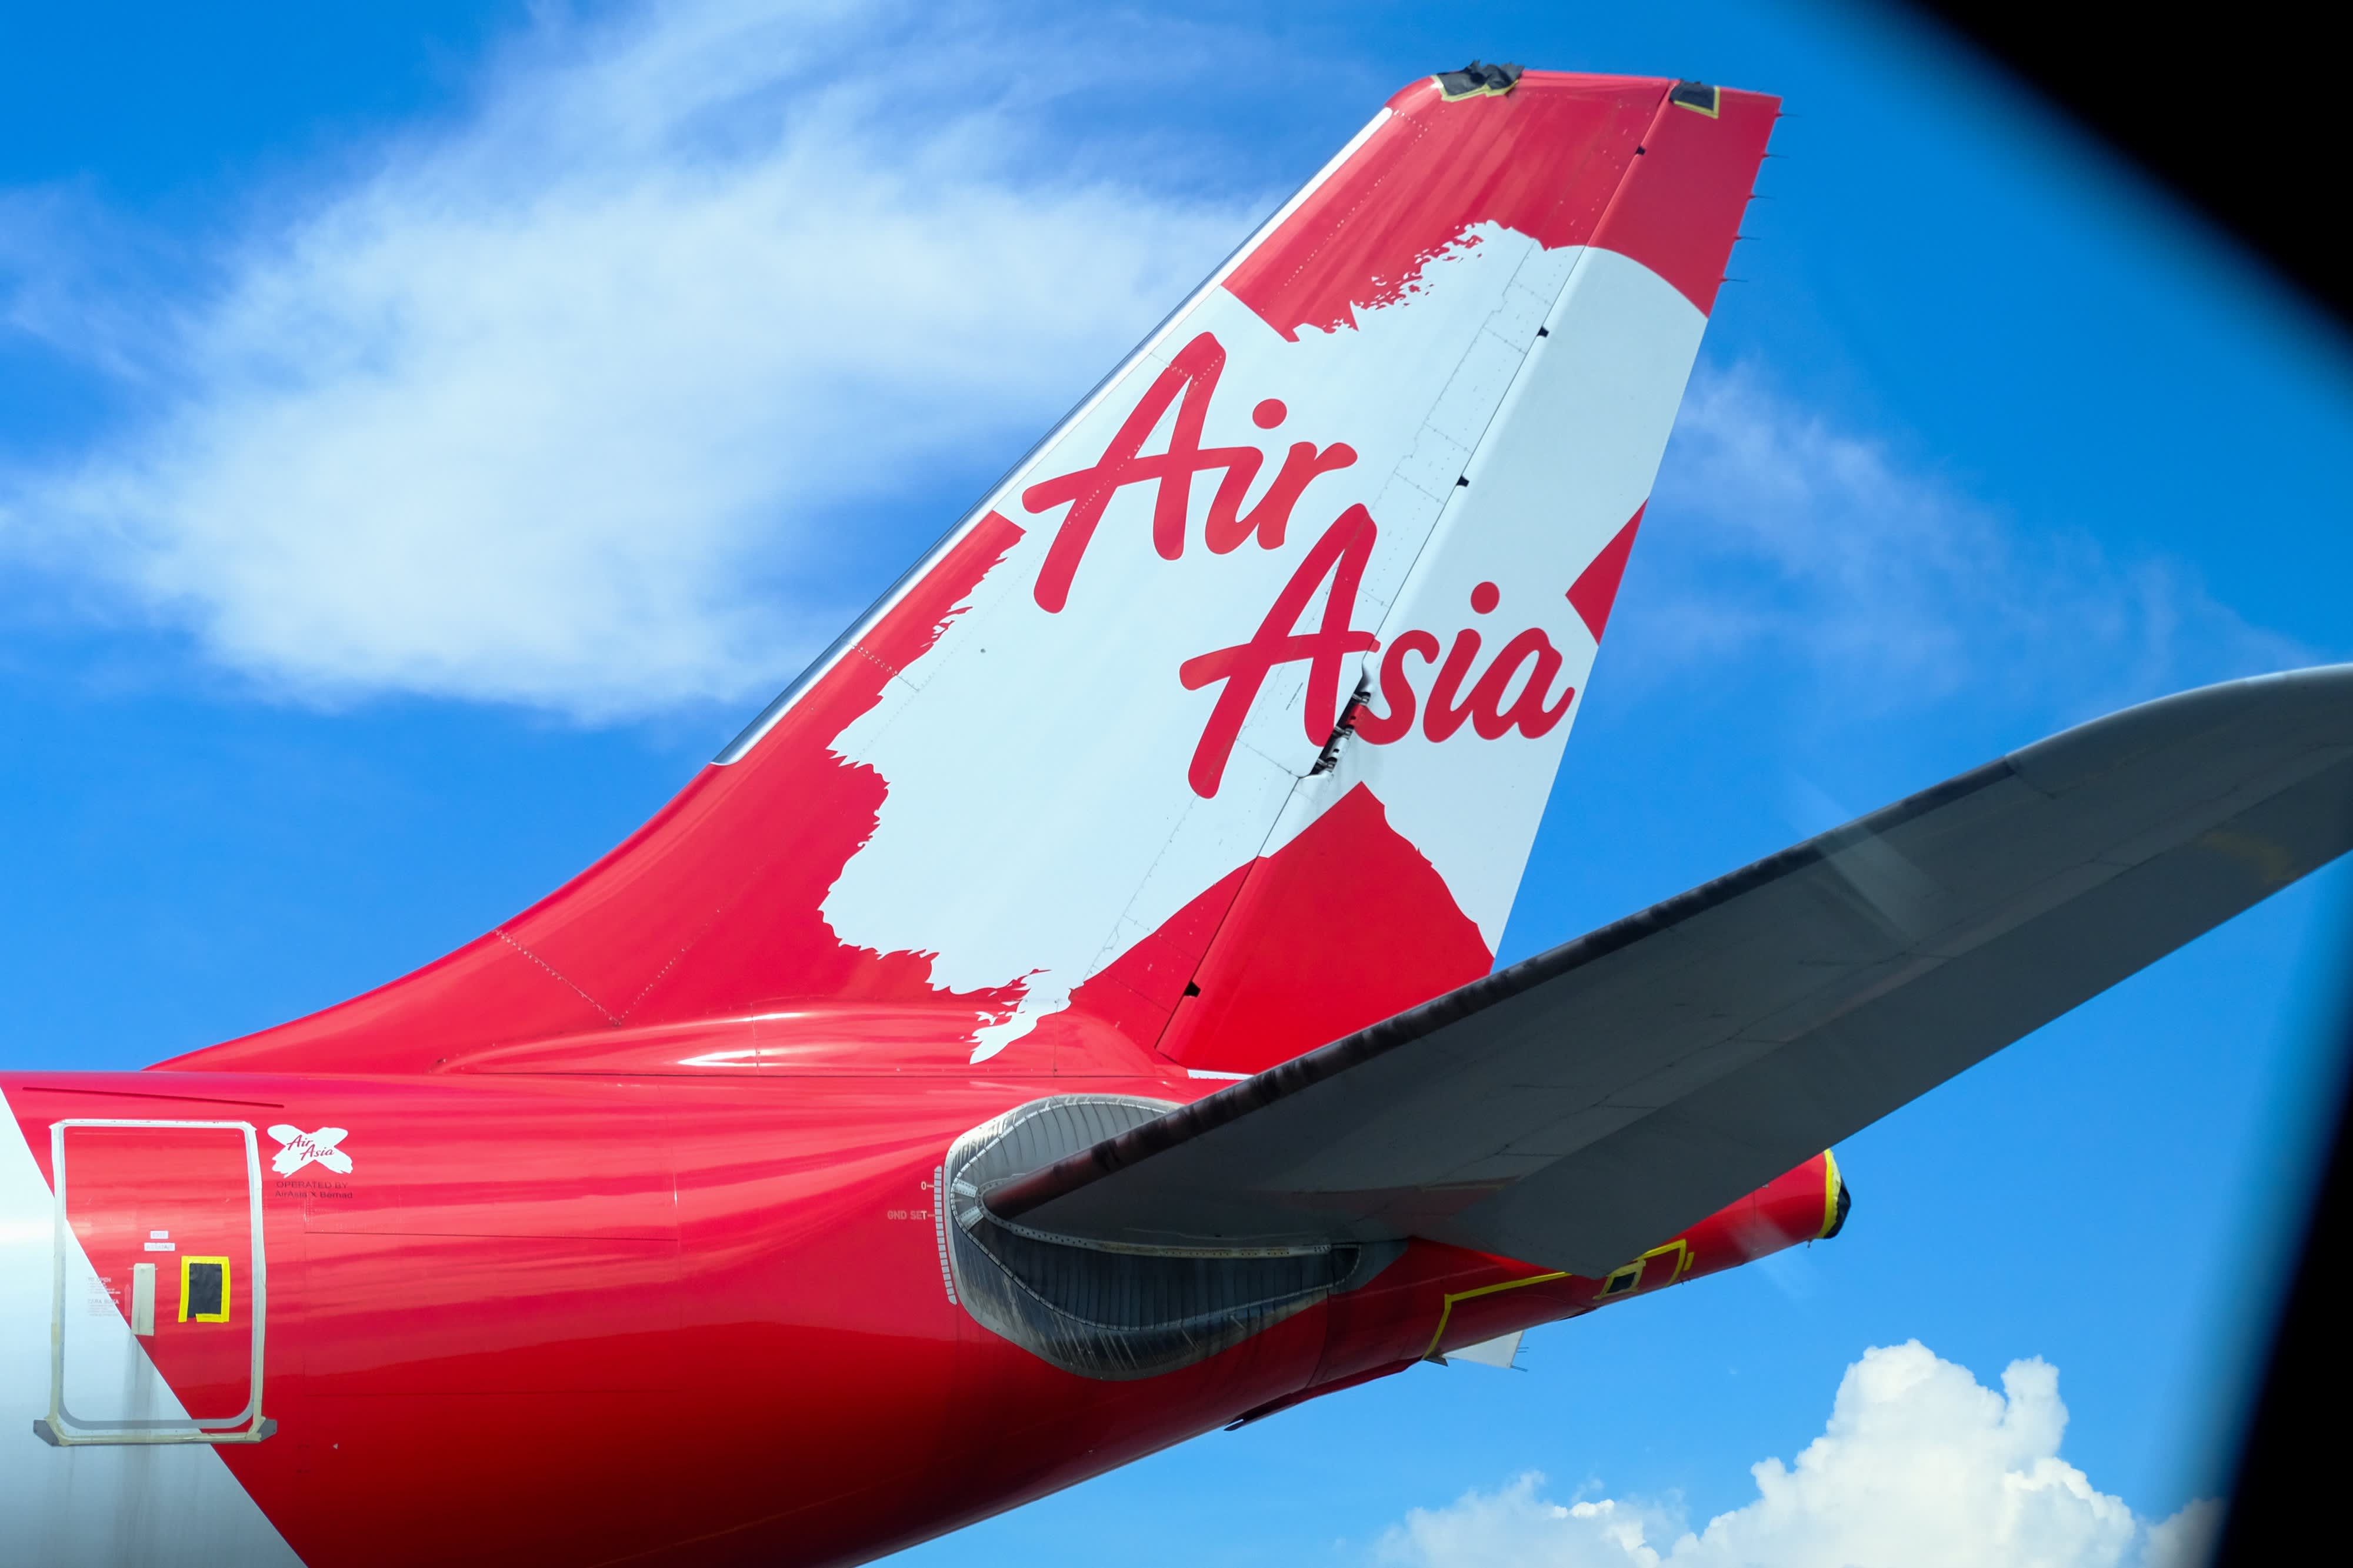 AirAsia CEO says international travel will bounce back strongly despite omicron impact